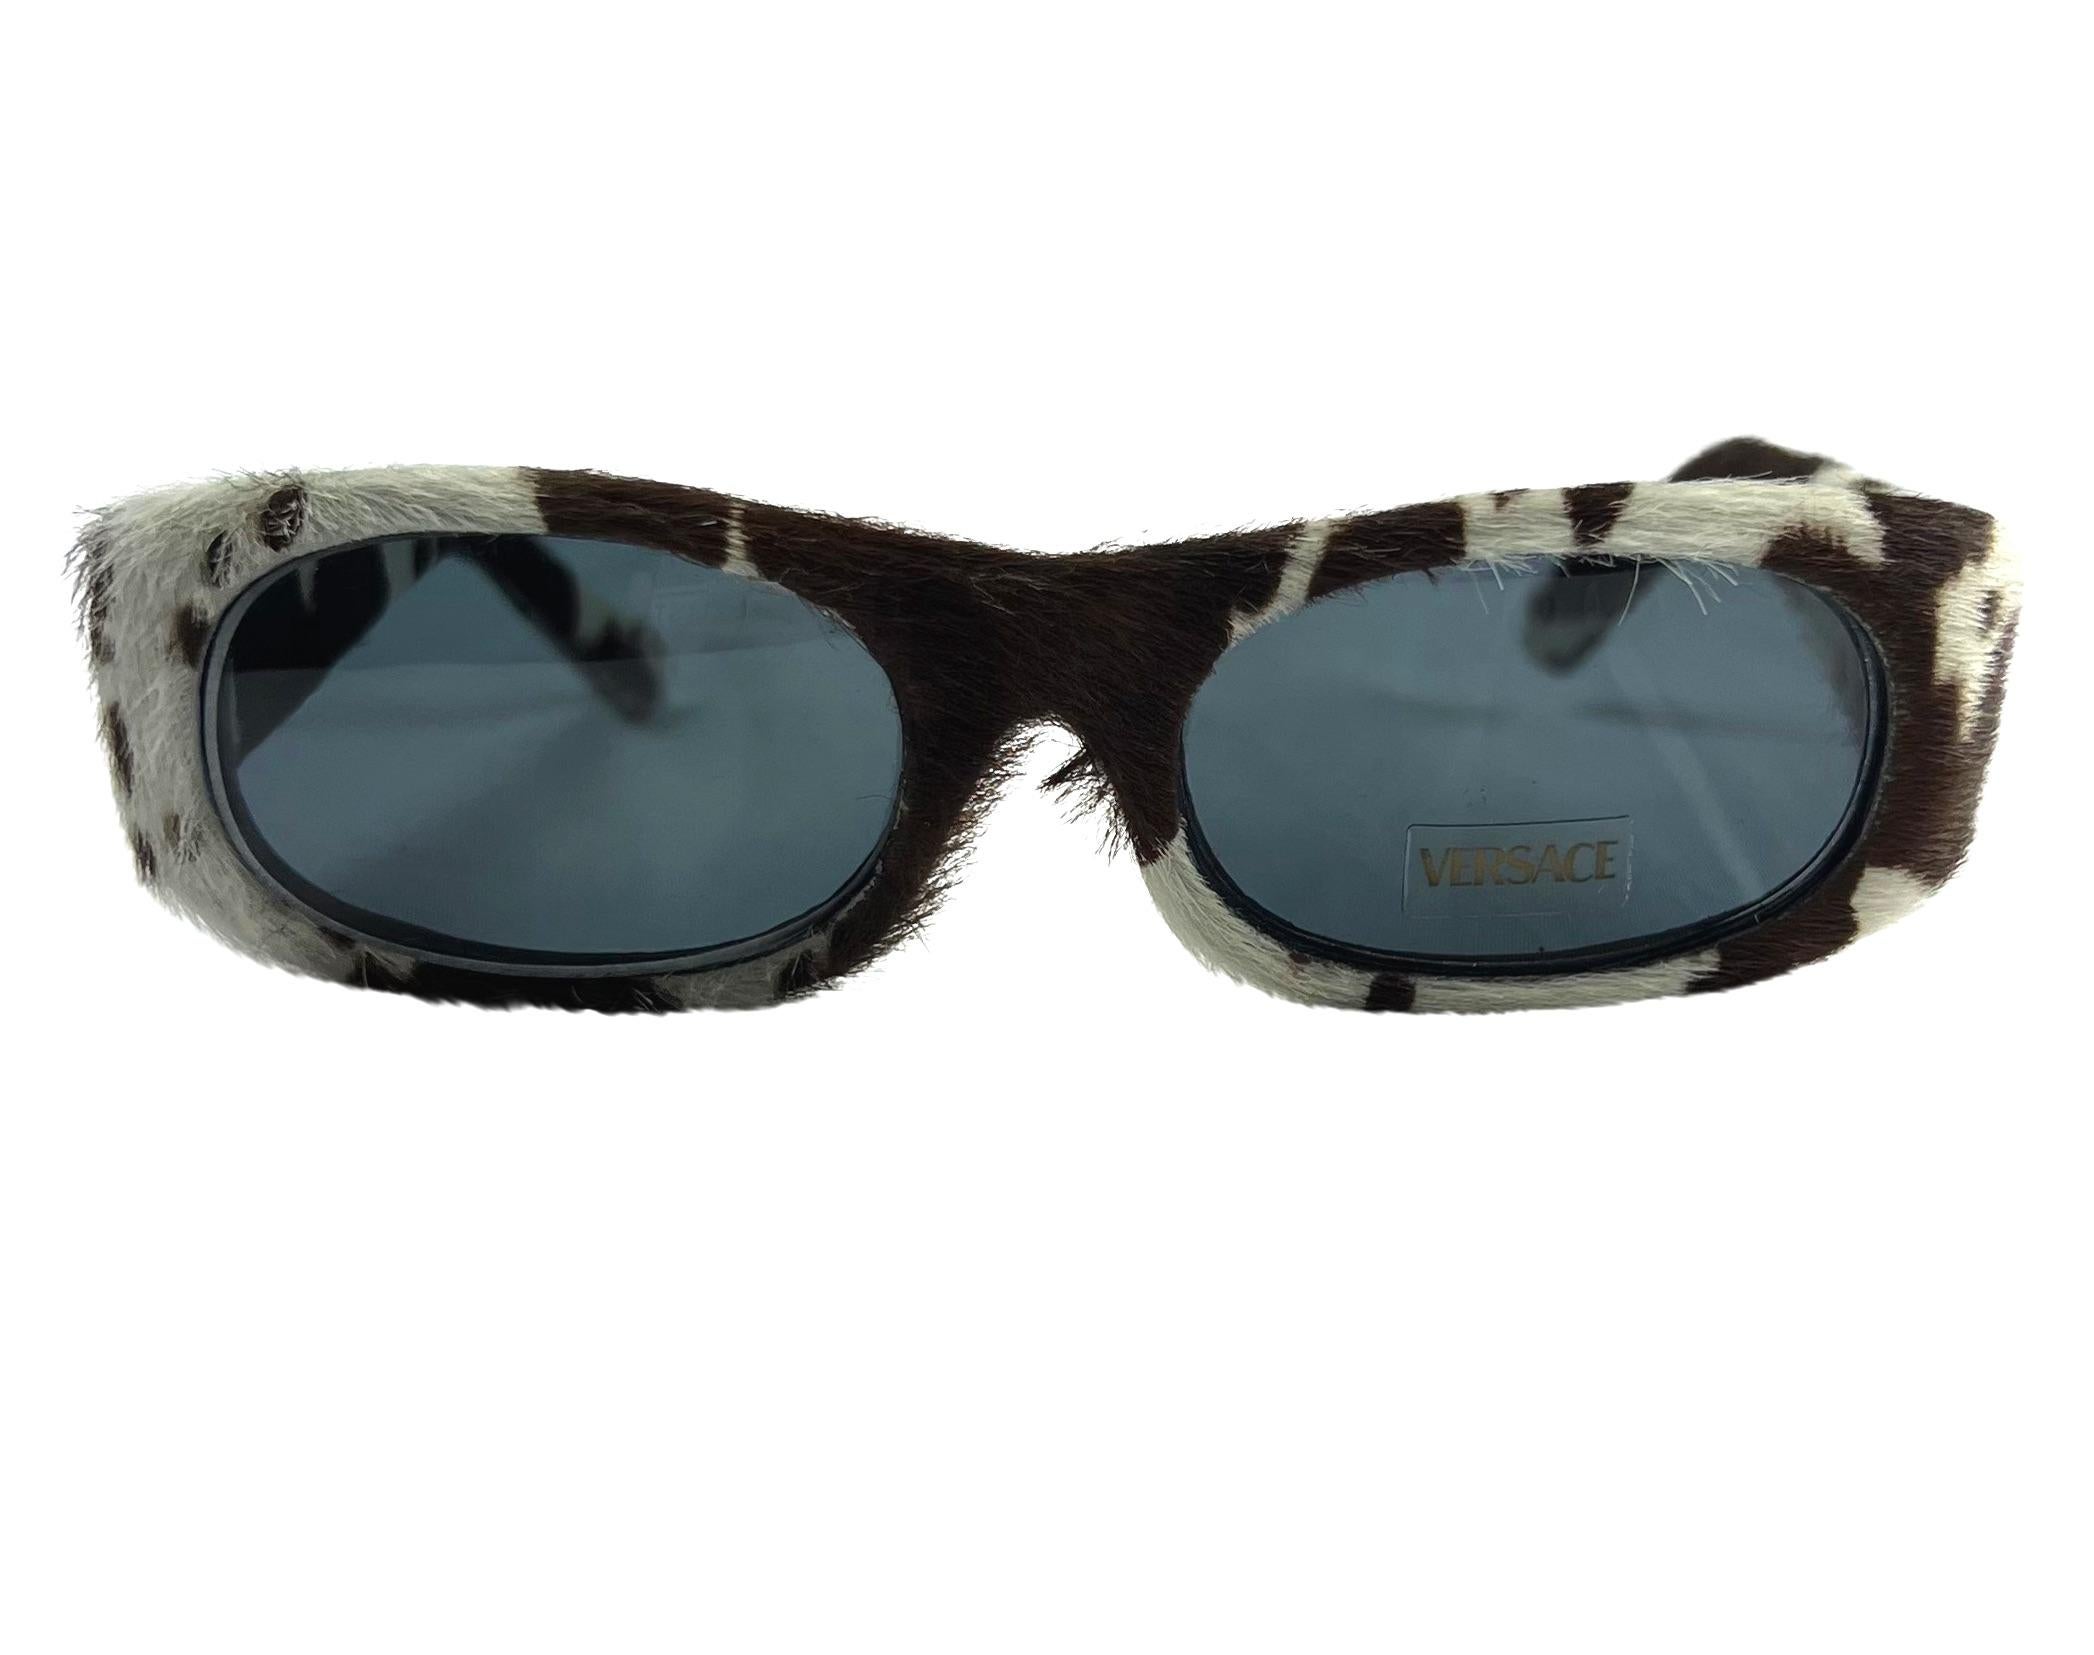 TheRealList presents: a fabulous pair of cow-print pony hair Versace sunglasses, designed by Donatella Versace. From the Spring/Summer 1999 collection, these sunglasses are covered in dotted pony hair and feature purple and green floral details at